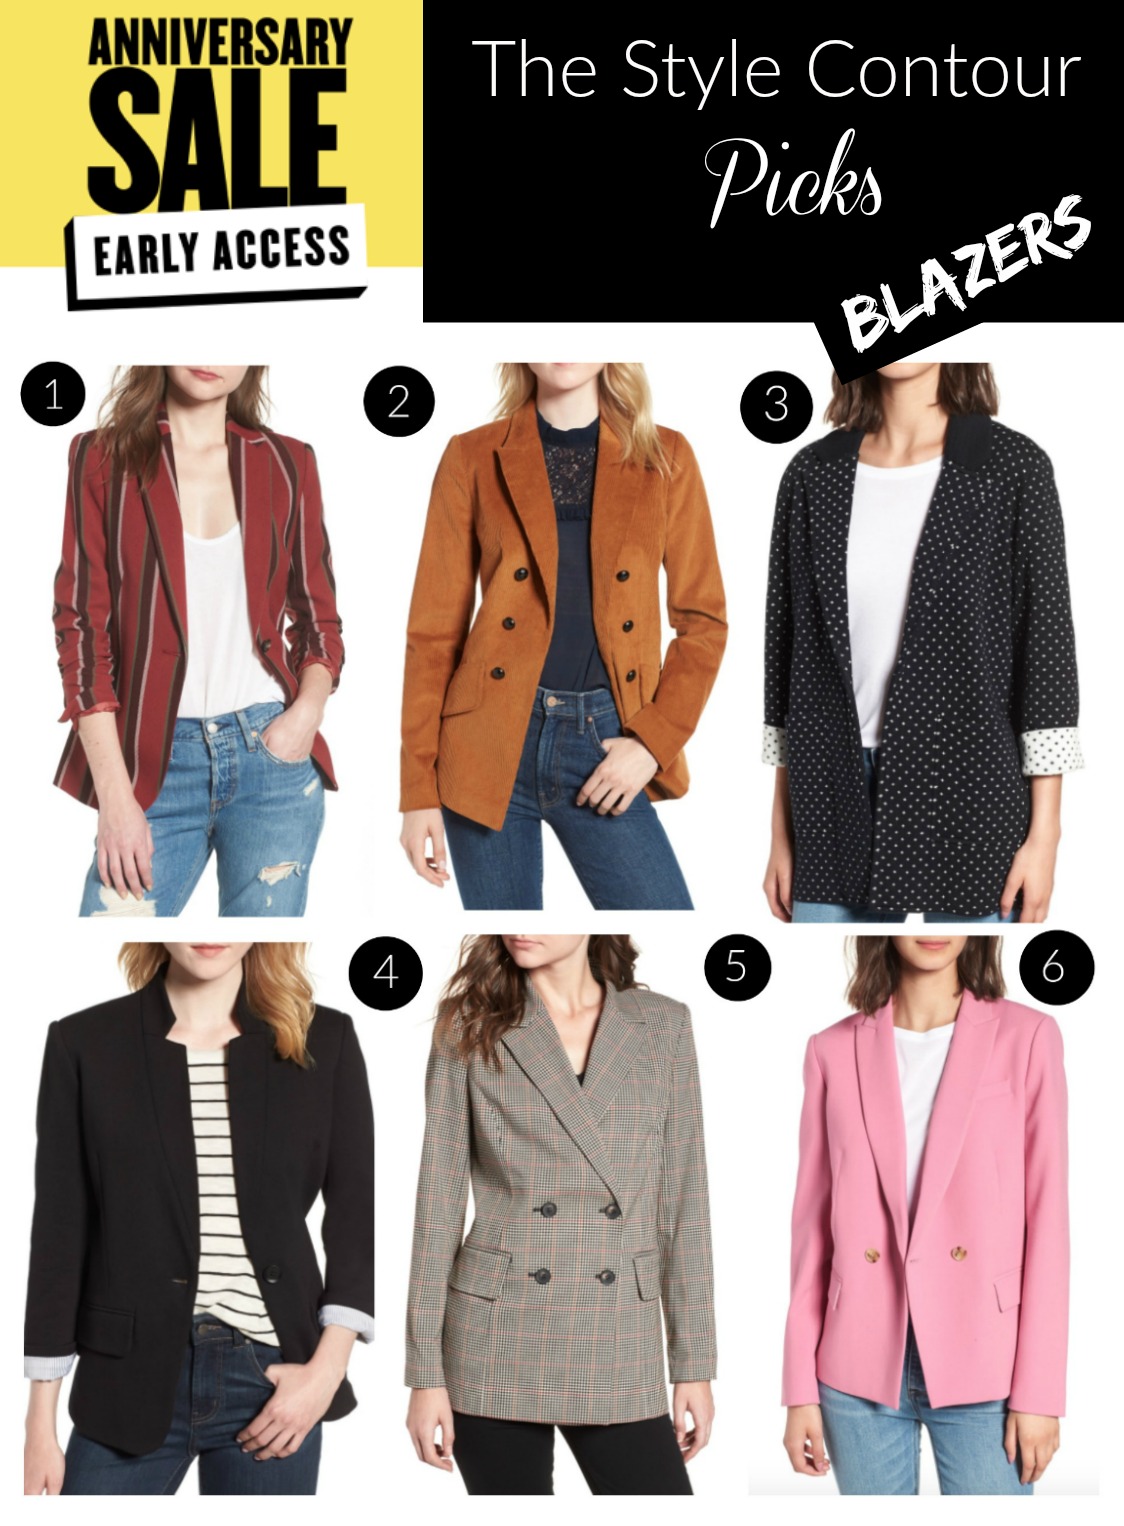 Nordstrom's Anniversary Sale: Early Access Picks 2018! - The Style Contour